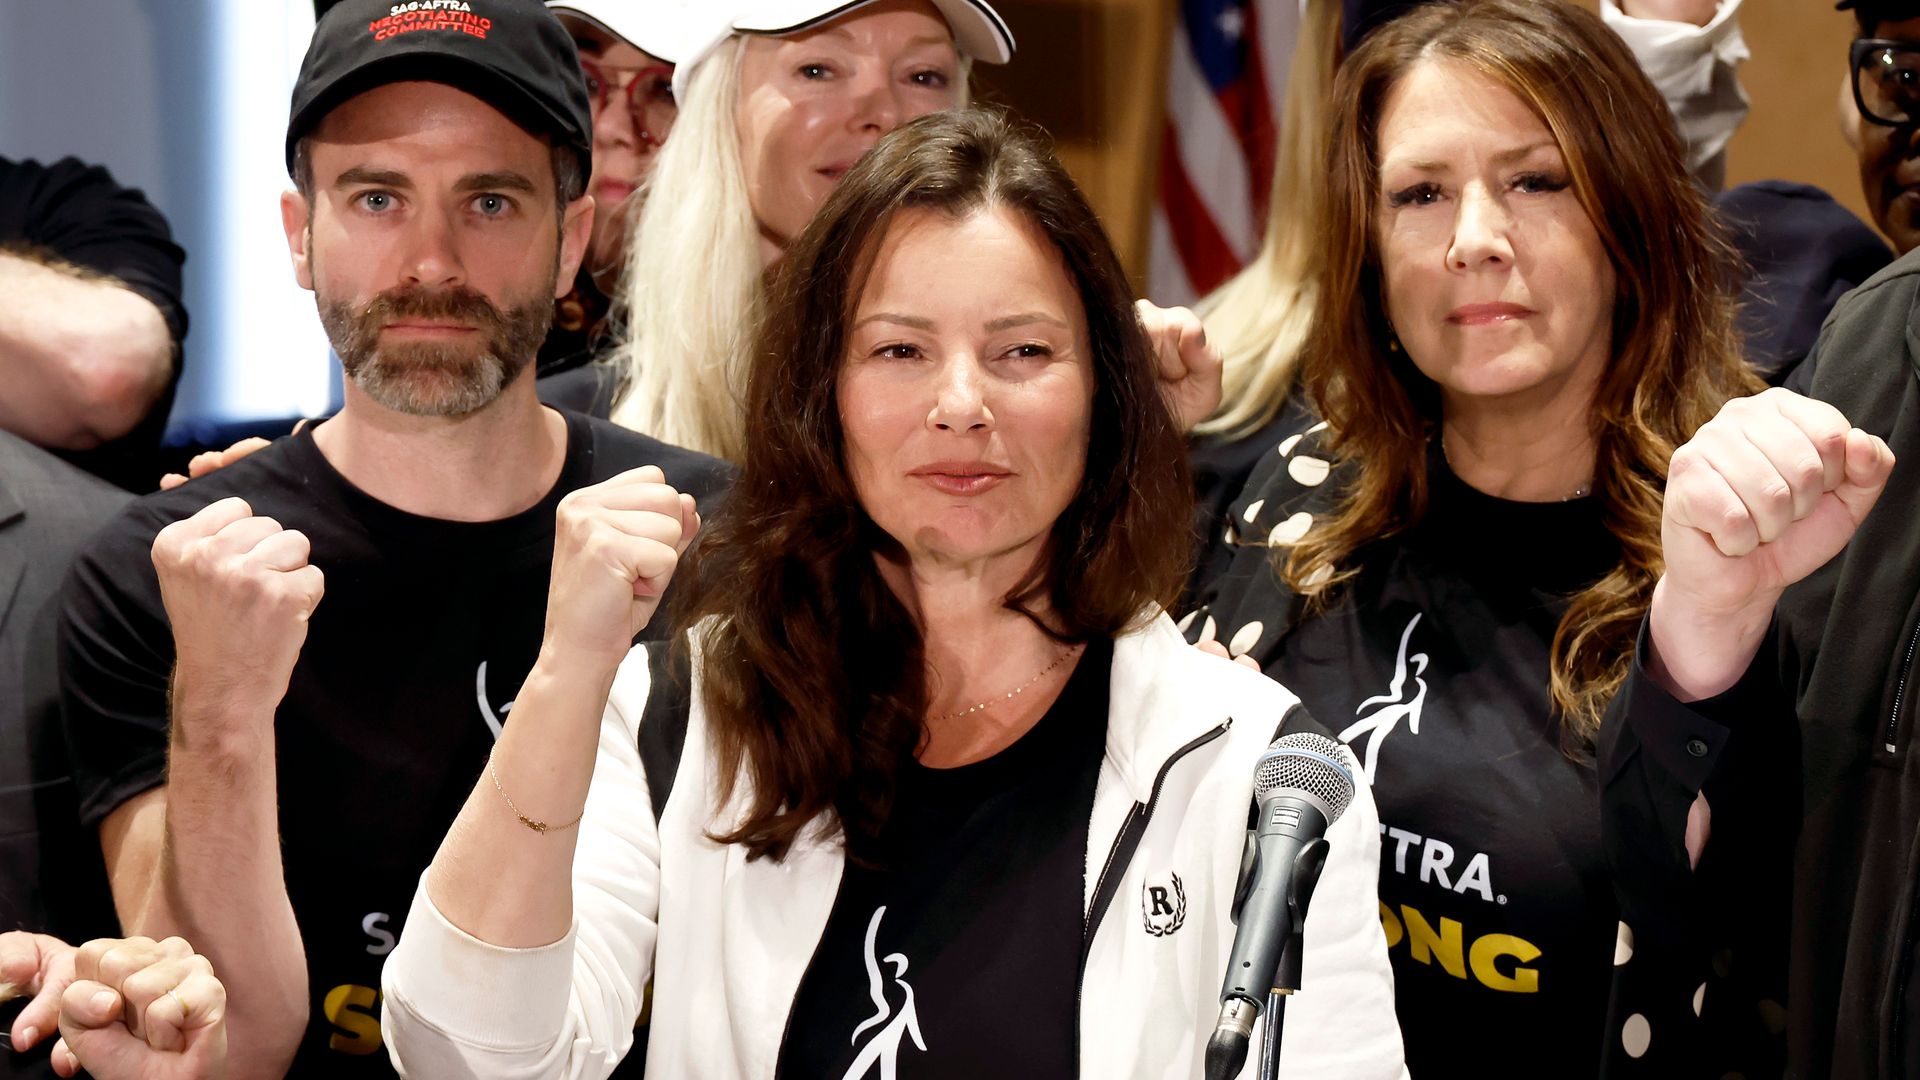 Ben Whitehair, Frances Fisher, SAG President Fran Drescher, Joely Fisher, Country Executive and members of SAG-AFTRA considered as SAG-AFTRA National Committee hold a press conference to vote on the suspension recommendation labour 